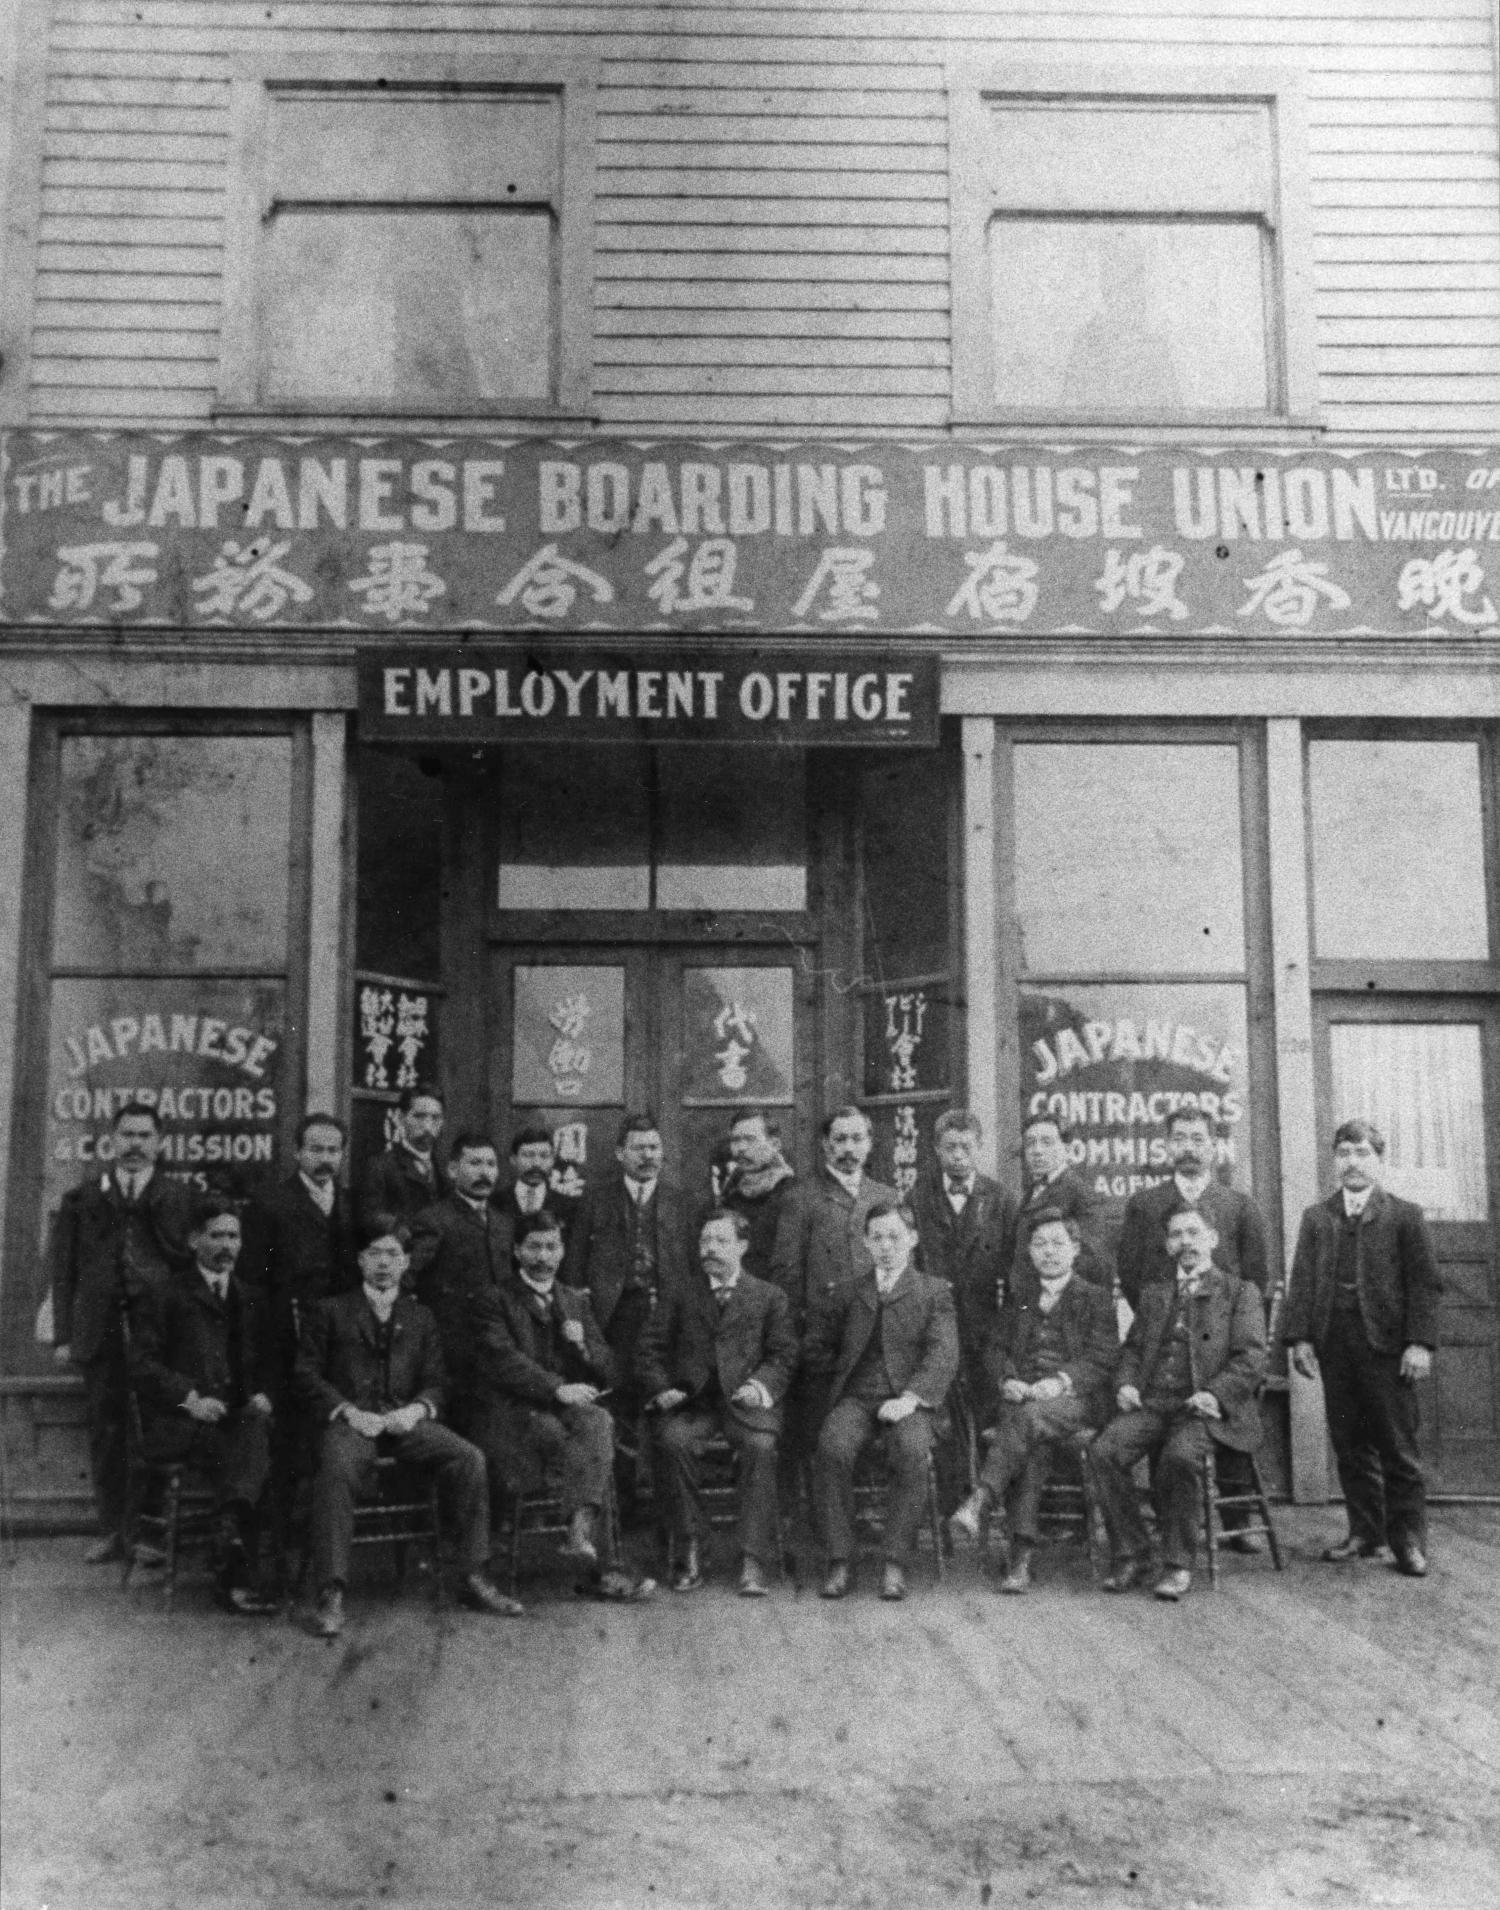 Japanese Boarding house union and employment office in Vancouver